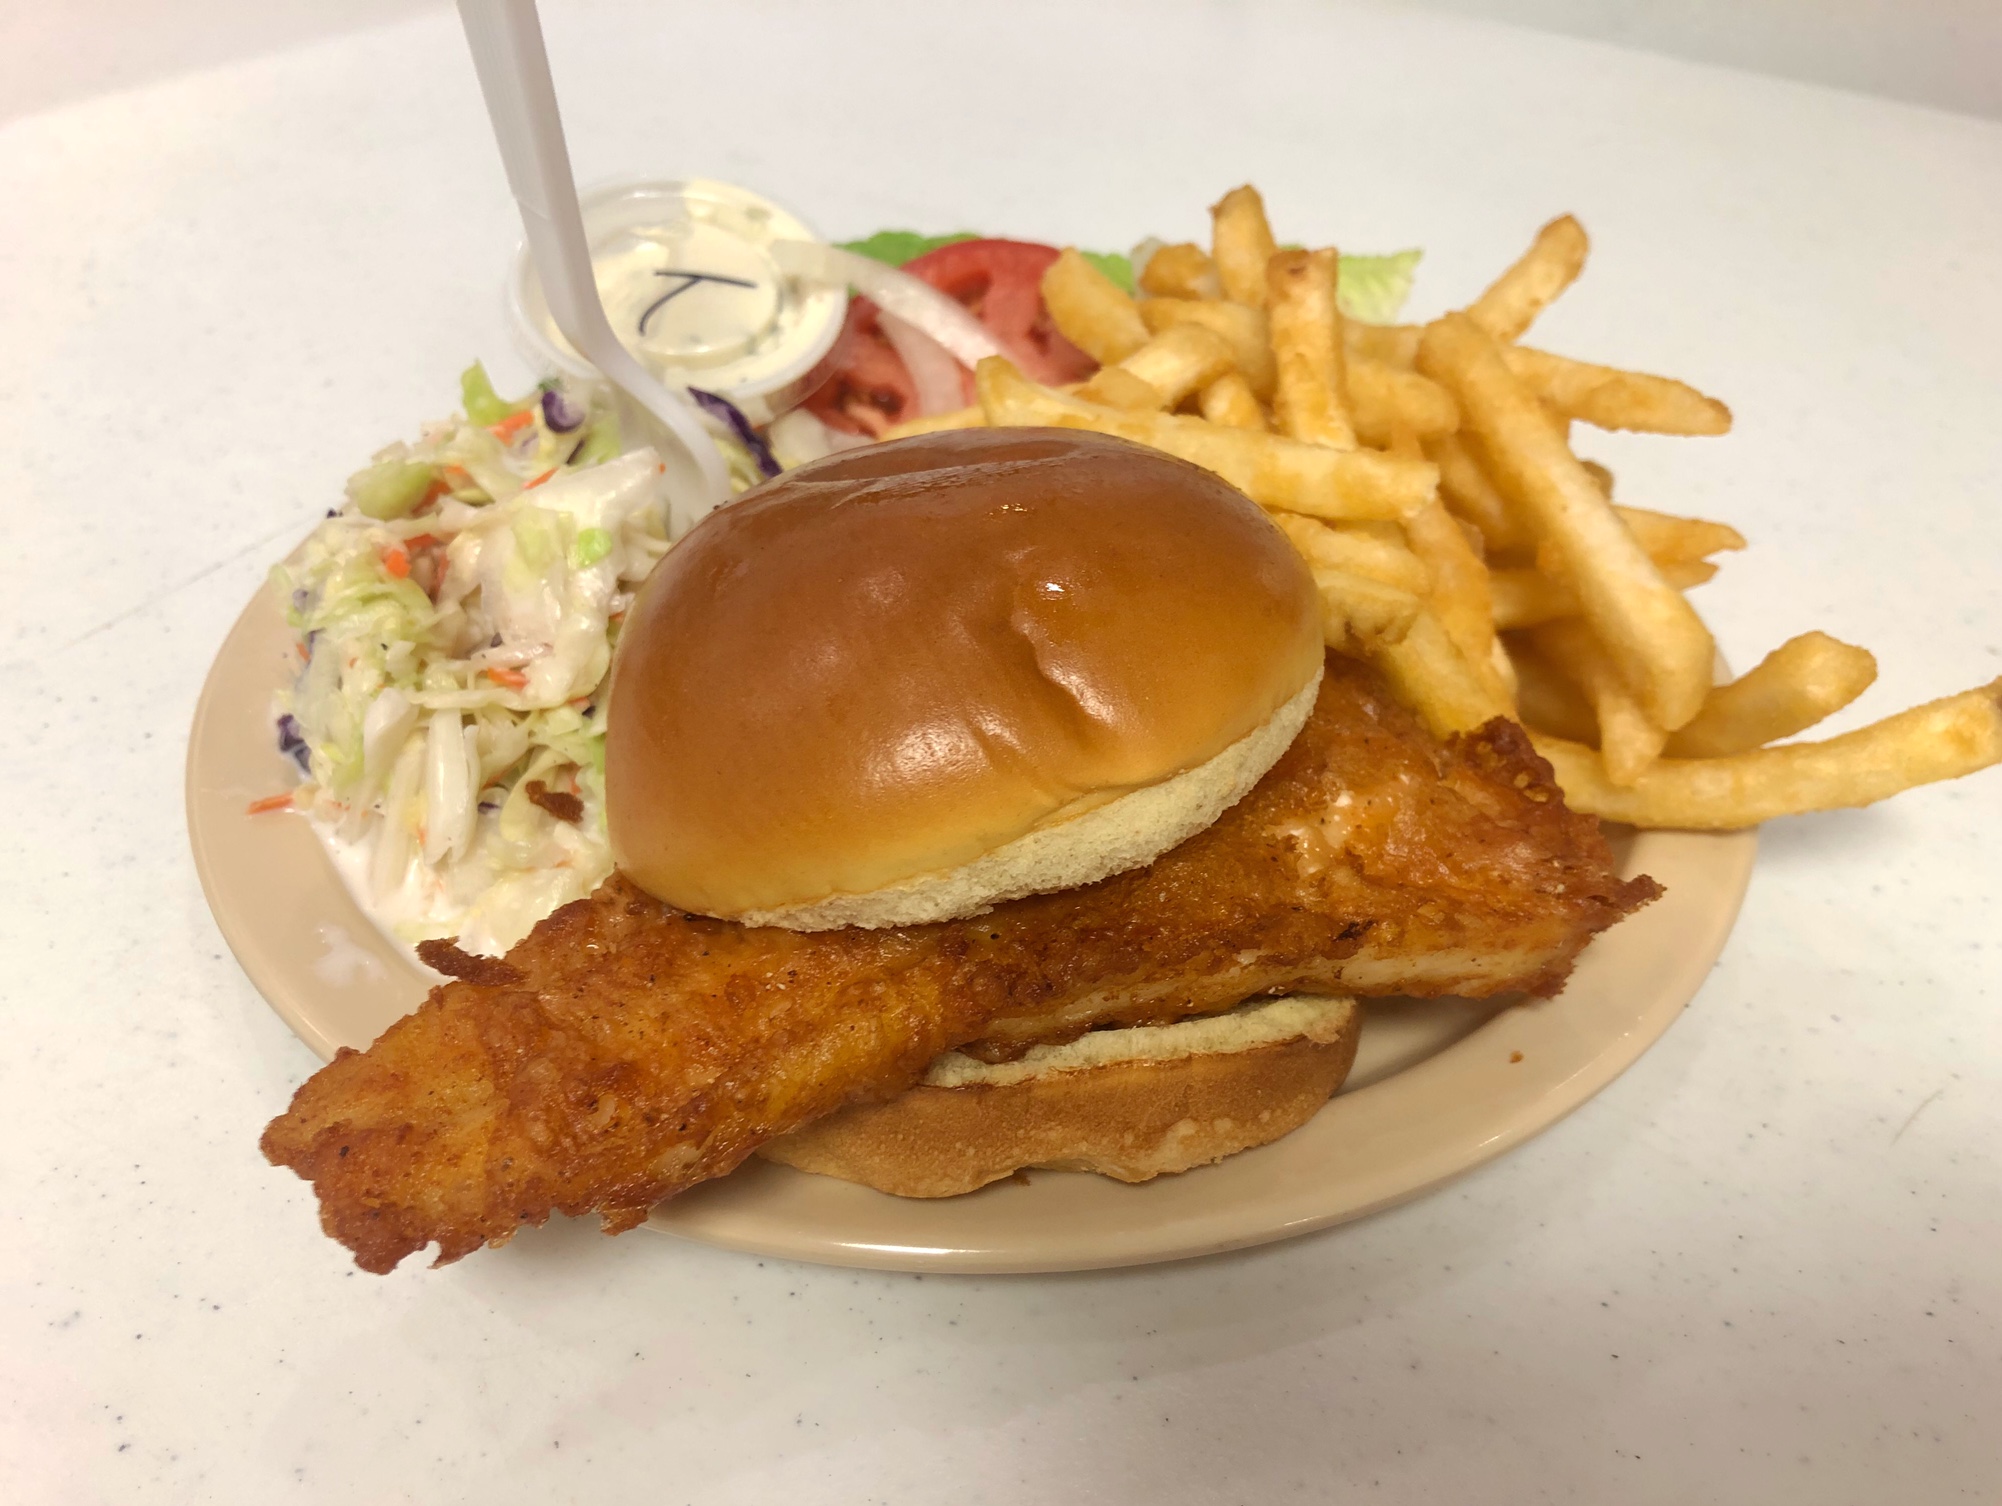 On a light brown plate, there is a fish sandwich with a filet of fish that sticks out both sides, a side of coleslaw with a plastic fork stuck in it, and a side of fries. Photo by Alyssa Buckley.